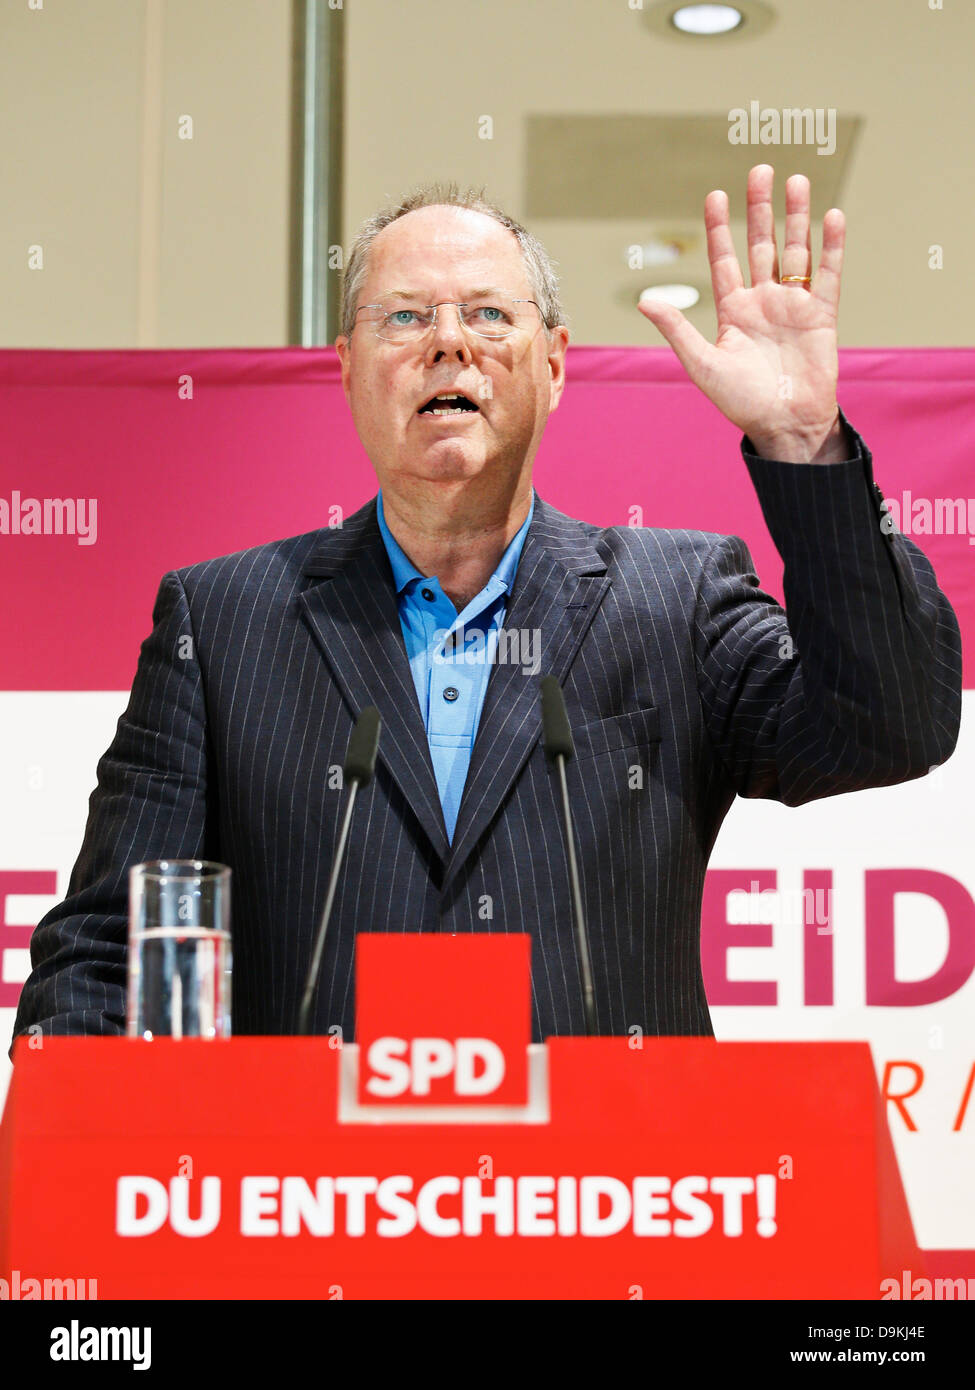 Germany, Berlin. 21th Juni, 2013. Peer Steinbrück, SPD chancellor candidate for the elections of 2013, hoist the rainbow flag, as tradition, during the CSD reception of Schwusos one day before Christopher-Street-Day-Parade in front of the Willy-Brandt-Haus in Berlin. Picture: Greeting by Peer Steinbr?ck, SPD candidate for chancellor, during CSD reception of Schwusos at Willy-Brandt-Haus in Berlin. Stock Photo